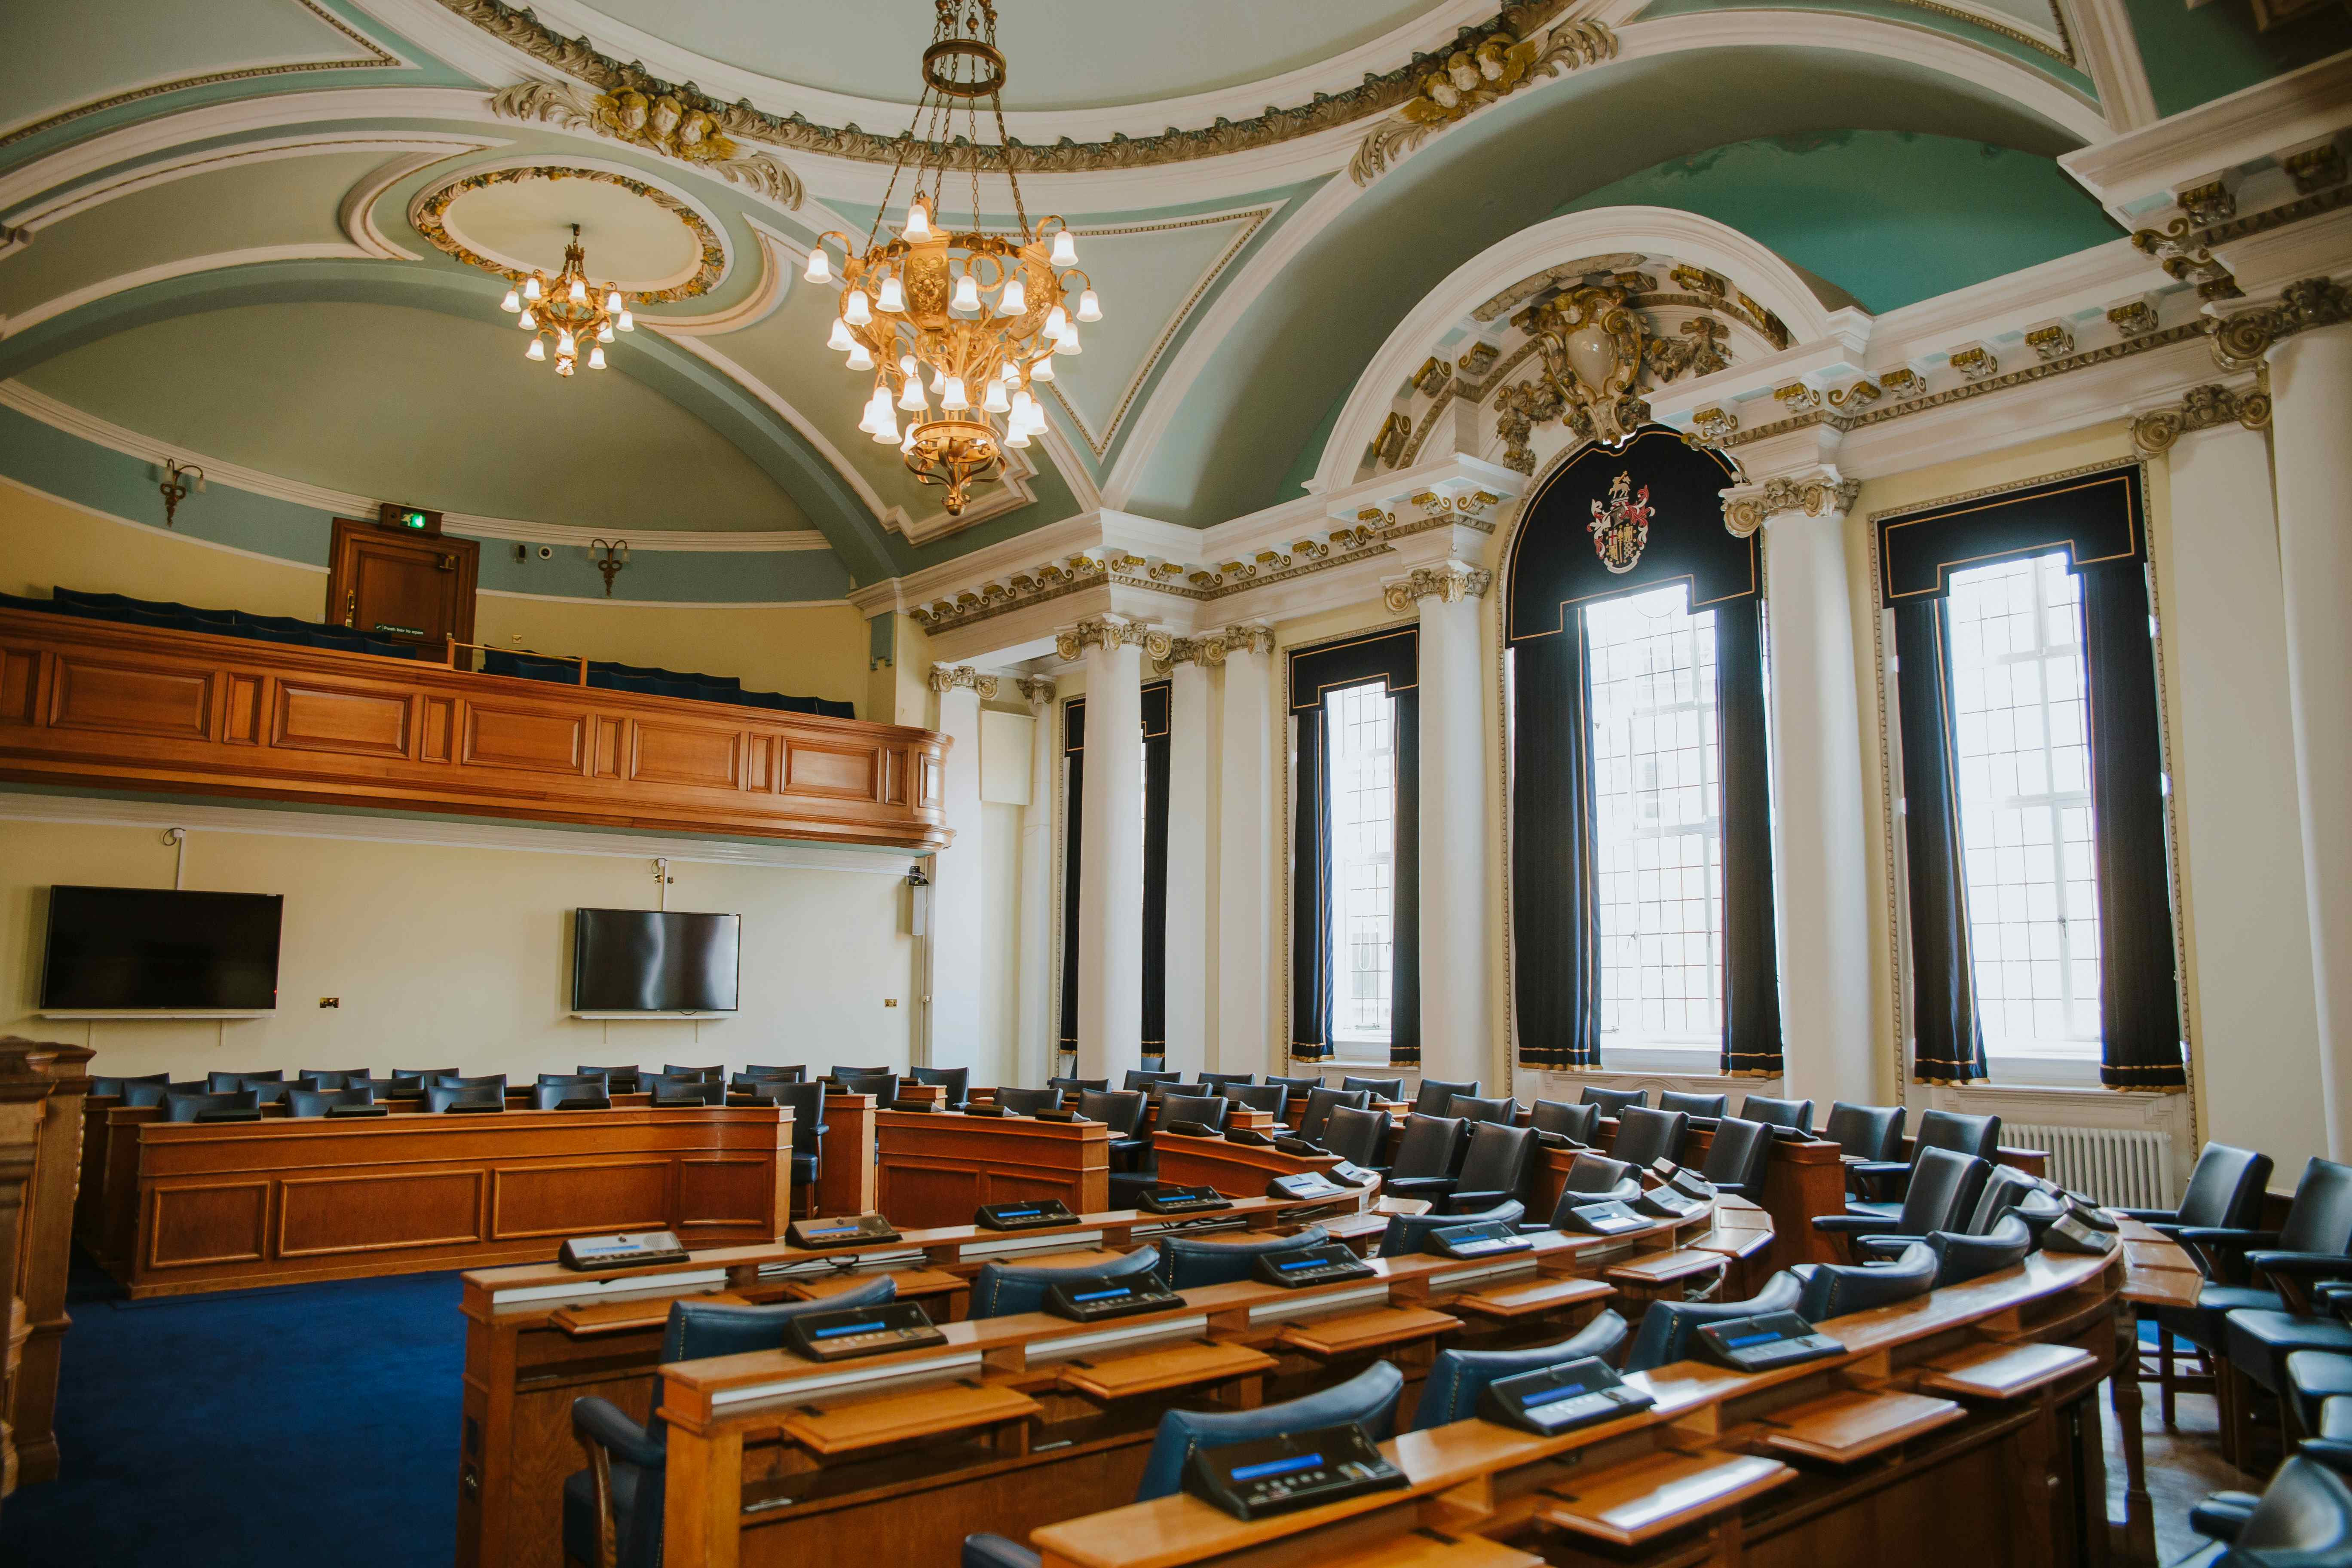 Council Chamber and Ante-Chamber, Lambeth Town Hall